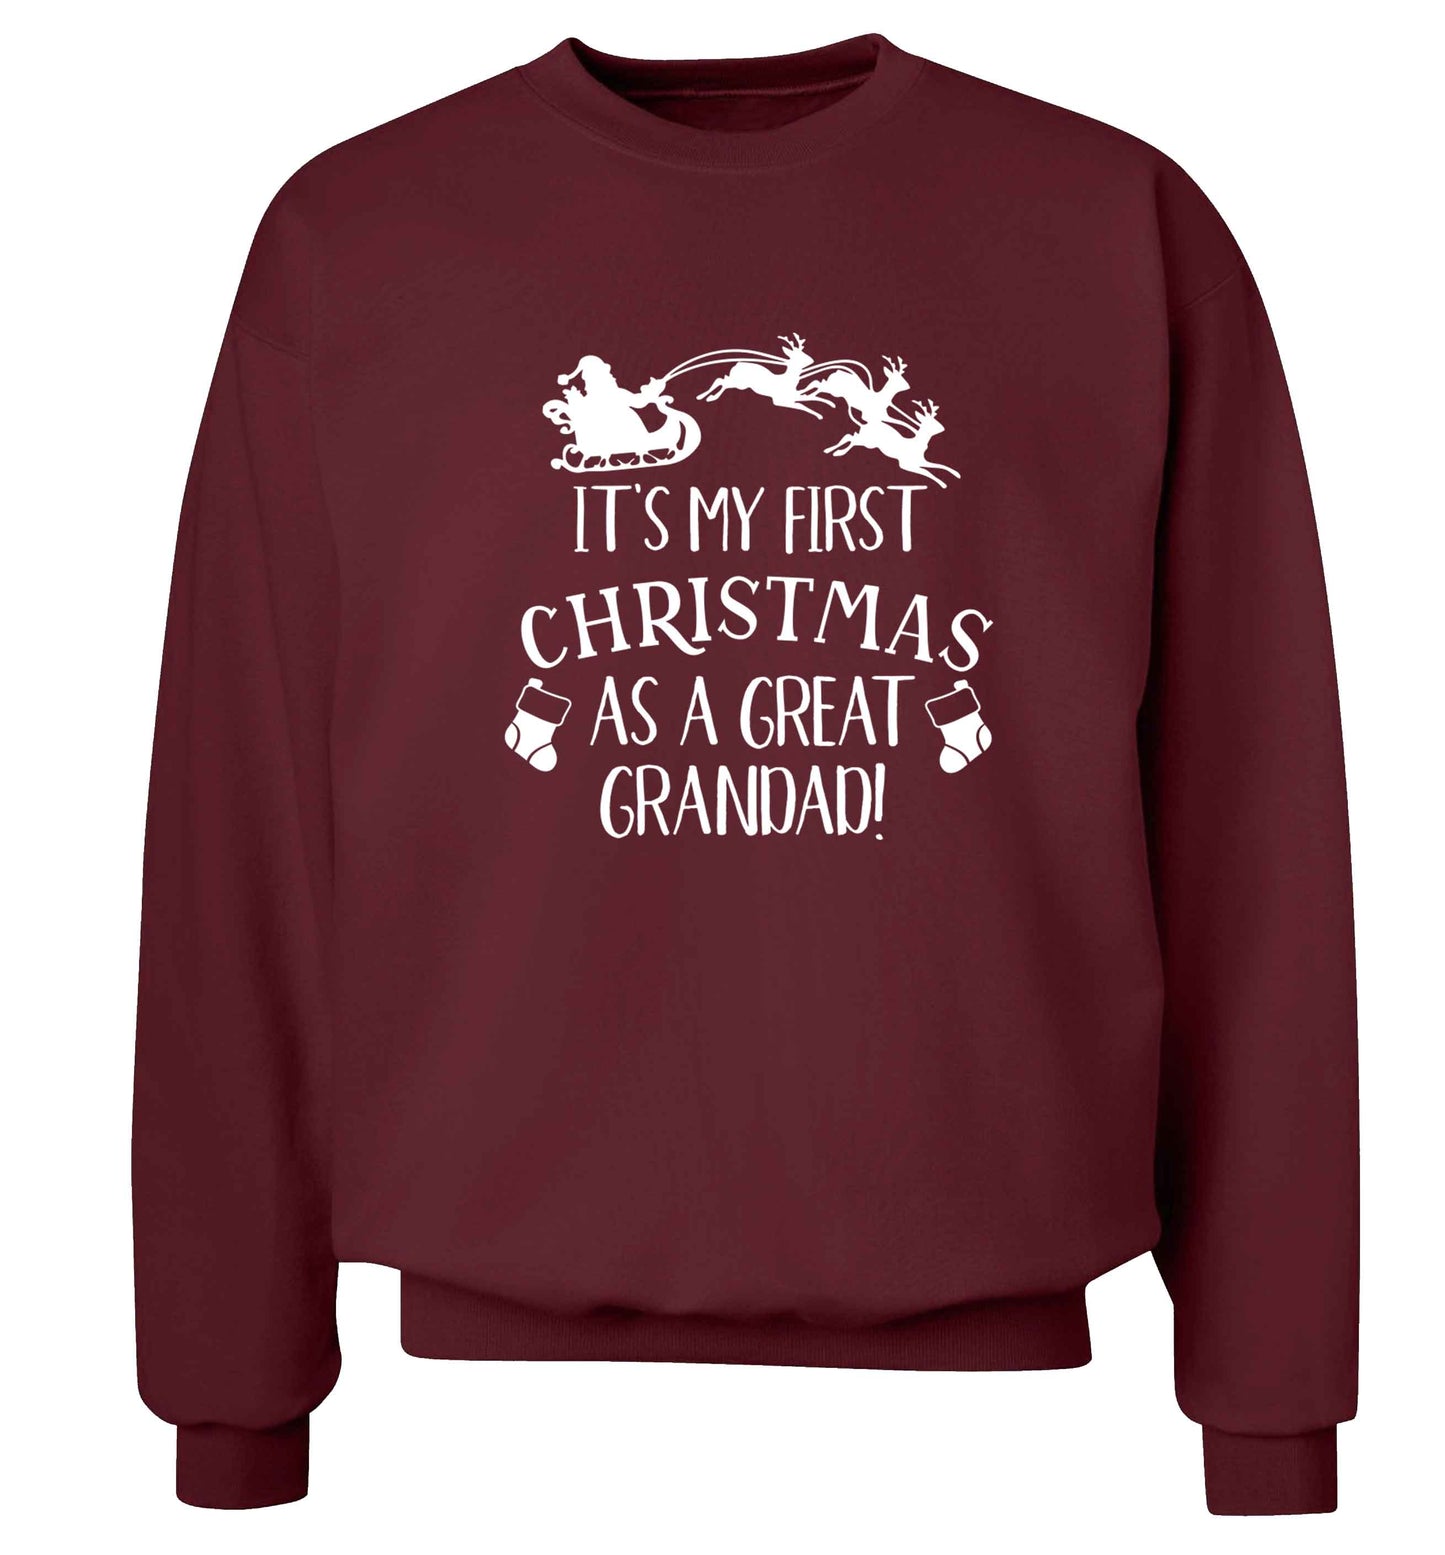 It's my first Christmas as a great grandad! Adult's unisex maroon Sweater 2XL